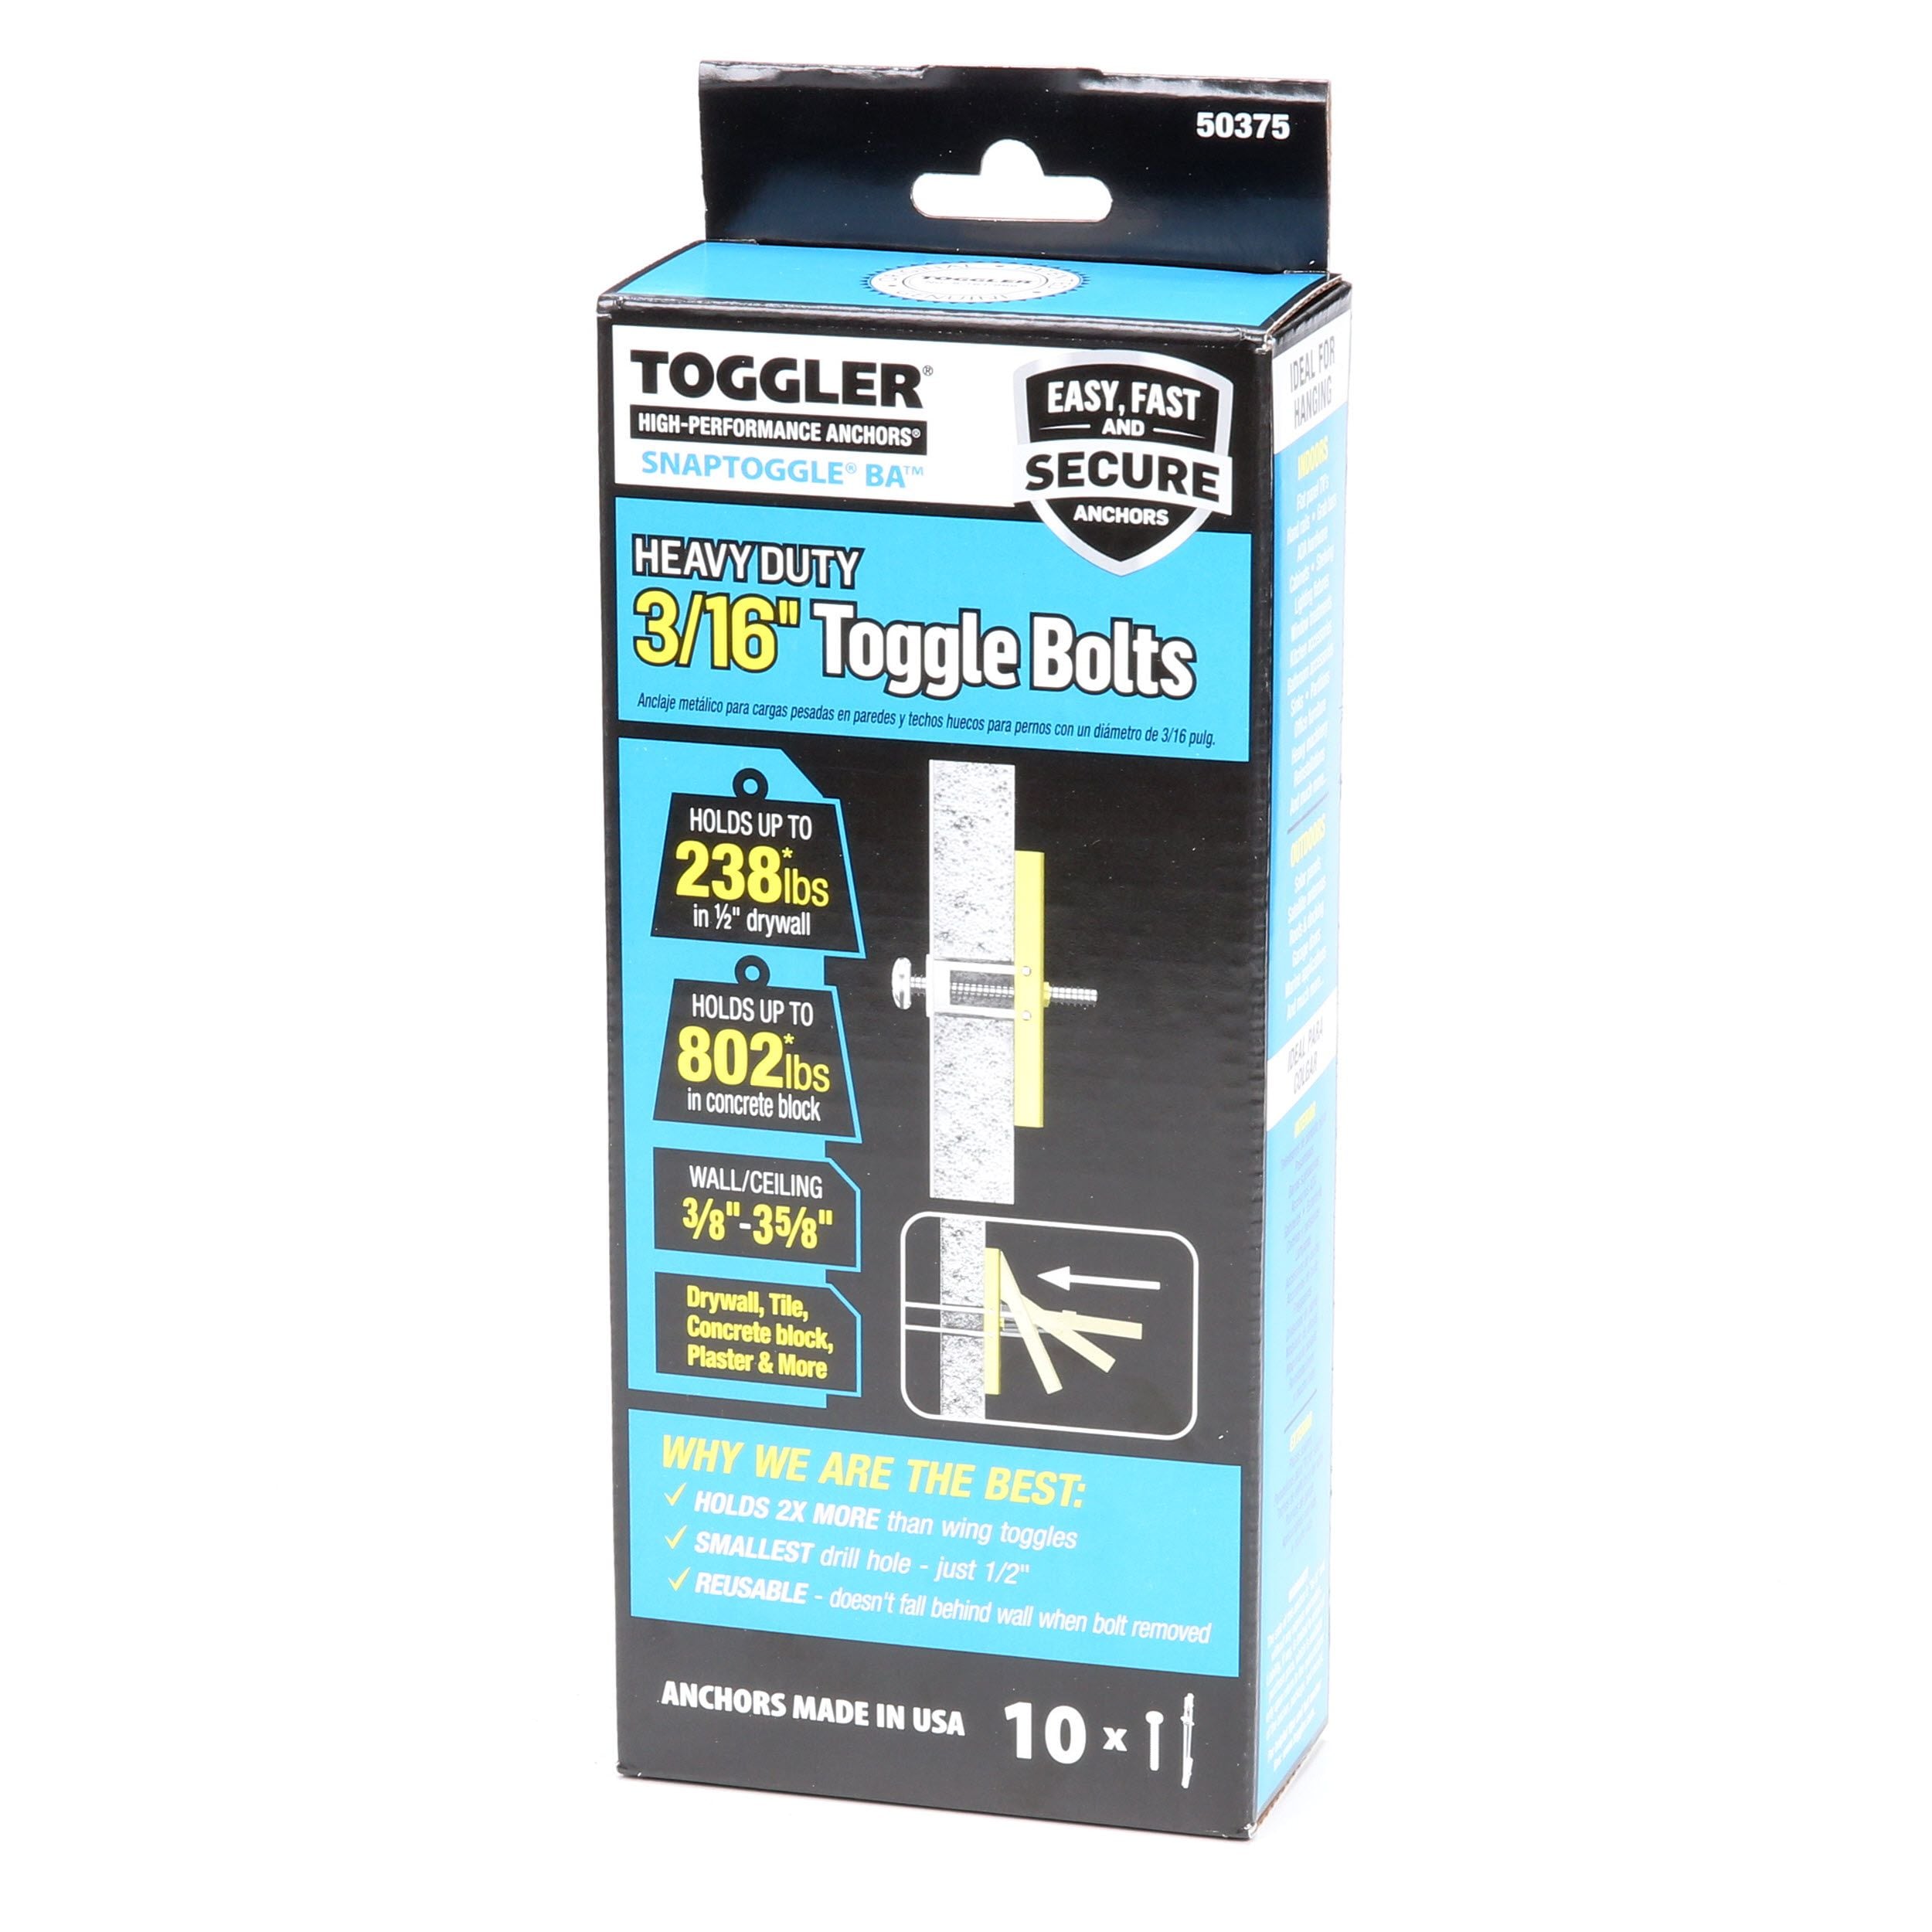 for 1/4-20 UNC Fastener Size Zinc-Plated Steel Channel Pack 4- Pack of 50 TOGGLER SNAPTOGGLE BB Toggle Anchor Made in US 3/8 to 3-5/8 Grip Range 